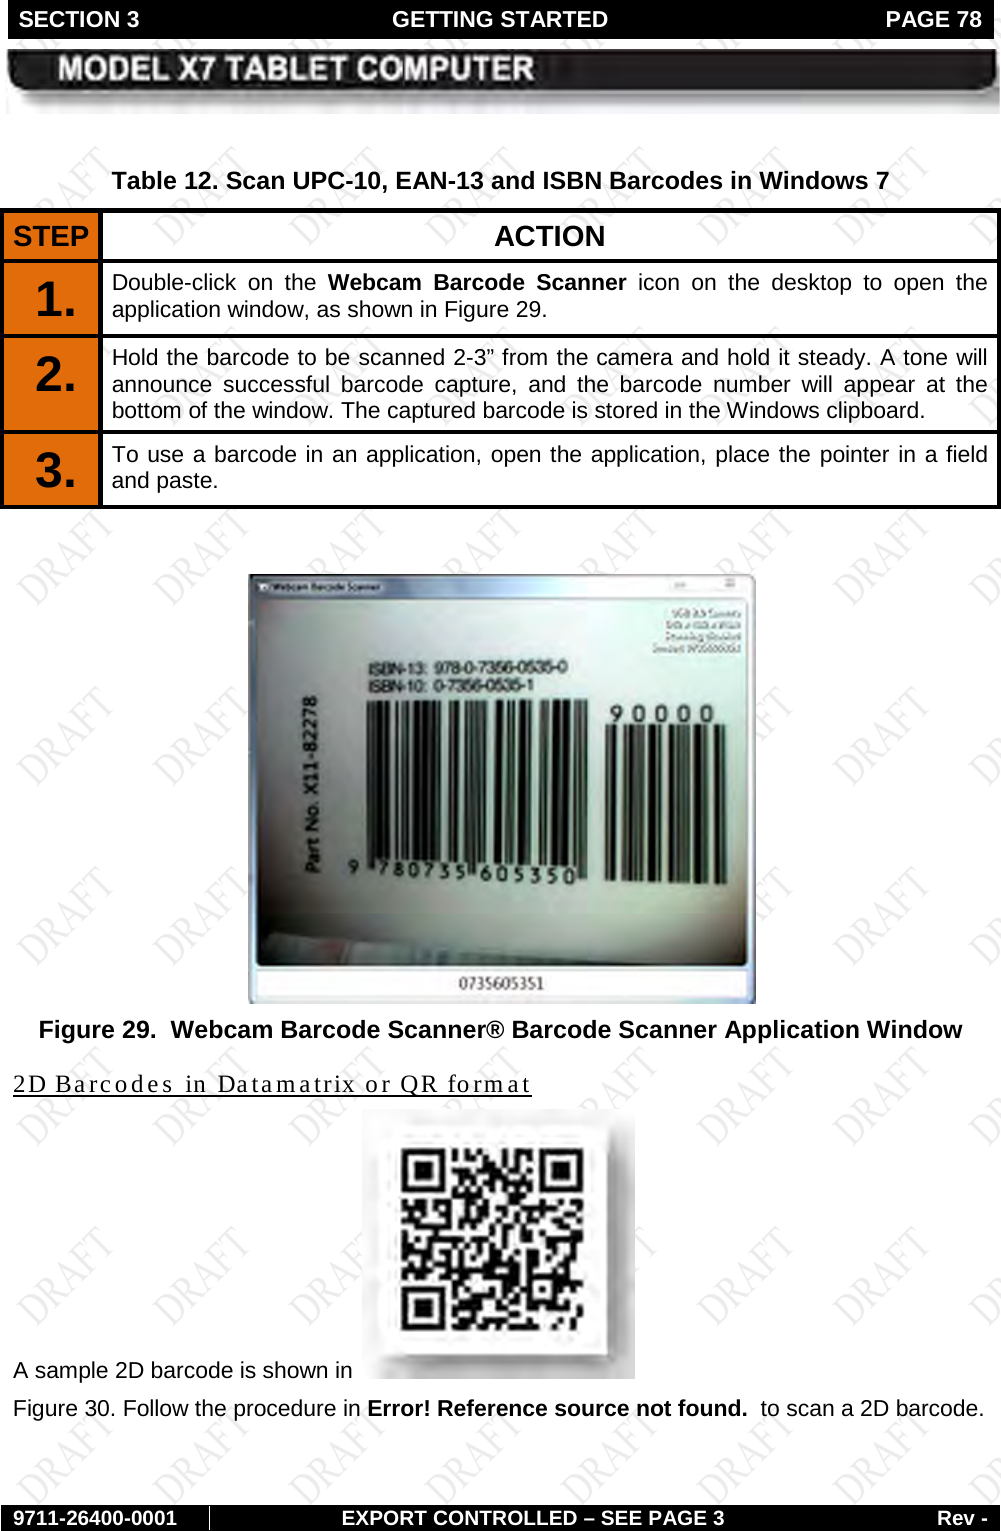 SECTION 3 GETTING STARTED  PAGE 78        9711-26400-0001 EXPORT CONTROLLED – SEE PAGE 3 Rev -  Table 12. Scan UPC-10, EAN-13 and ISBN Barcodes in Windows 7 STEP  ACTION 1.  Double-click on the Webcam Barcode Scanner icon on the desktop to open the application window, as shown in Figure 29.  2.  Hold the barcode to be scanned 2-3” from the camera and hold it steady. A tone will announce successful barcode capture, and the barcode number will appear at the bottom of the window. The captured barcode is stored in the Windows clipboard. 3.  To use a barcode in an application, open the application, place the pointer in a field and paste.    Figure 29.  Webcam Barcode Scanner® Barcode Scanner Application Window A sample 2D barcode is shown in 2D Barcodes in Datamatrix or QR format  Figure 30. Follow the procedure in Error! Reference source not found.  to scan a 2D barcode. 